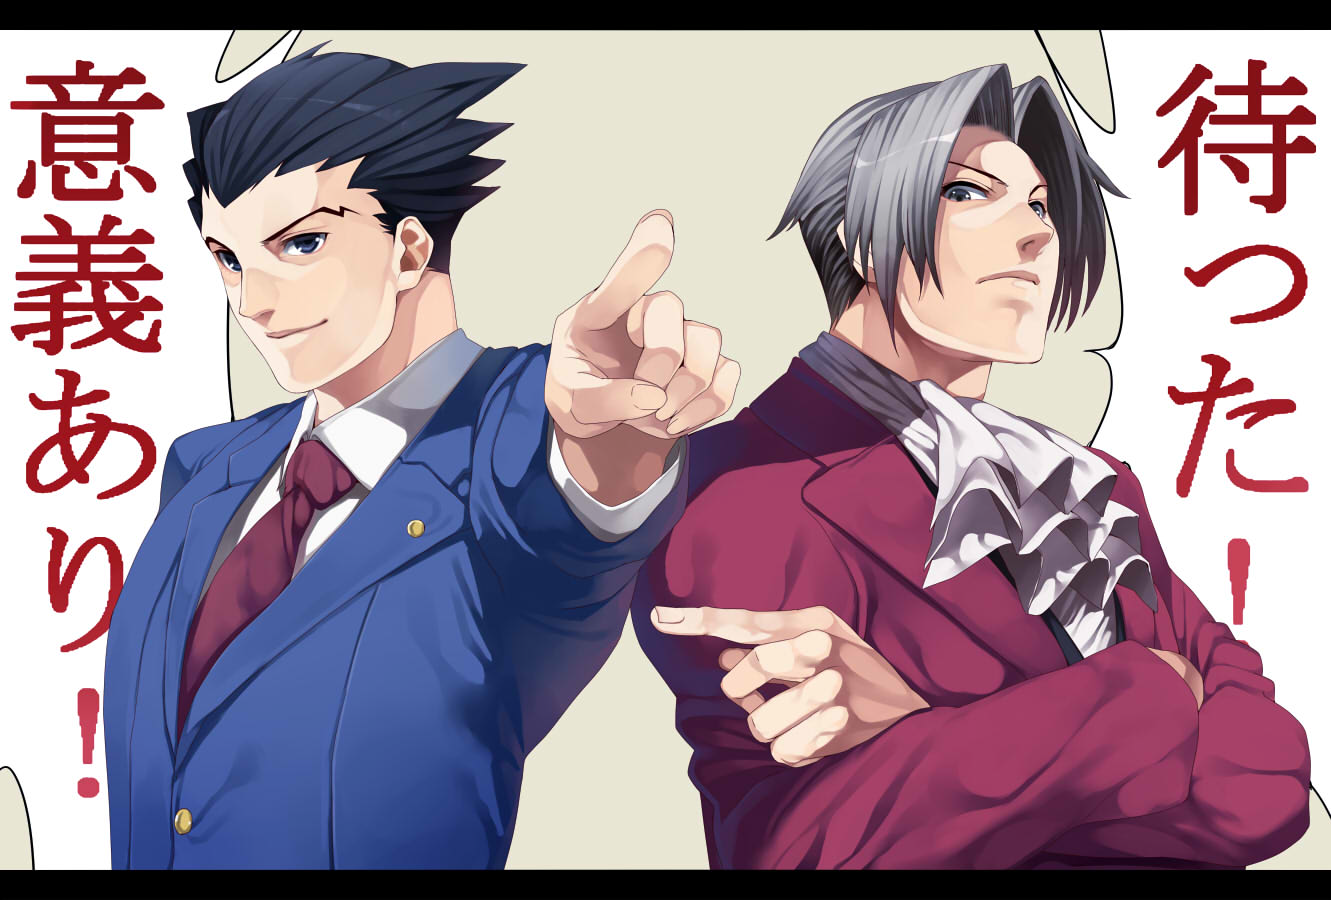 Ace attorney miles. Феникс Райт и Майлз Эджворт. Ace attorney Наруходо и Мицуруги. Ace attorney Феникс и Майлз. Ace attorney Феникс Райт и Майлз Эджворт.